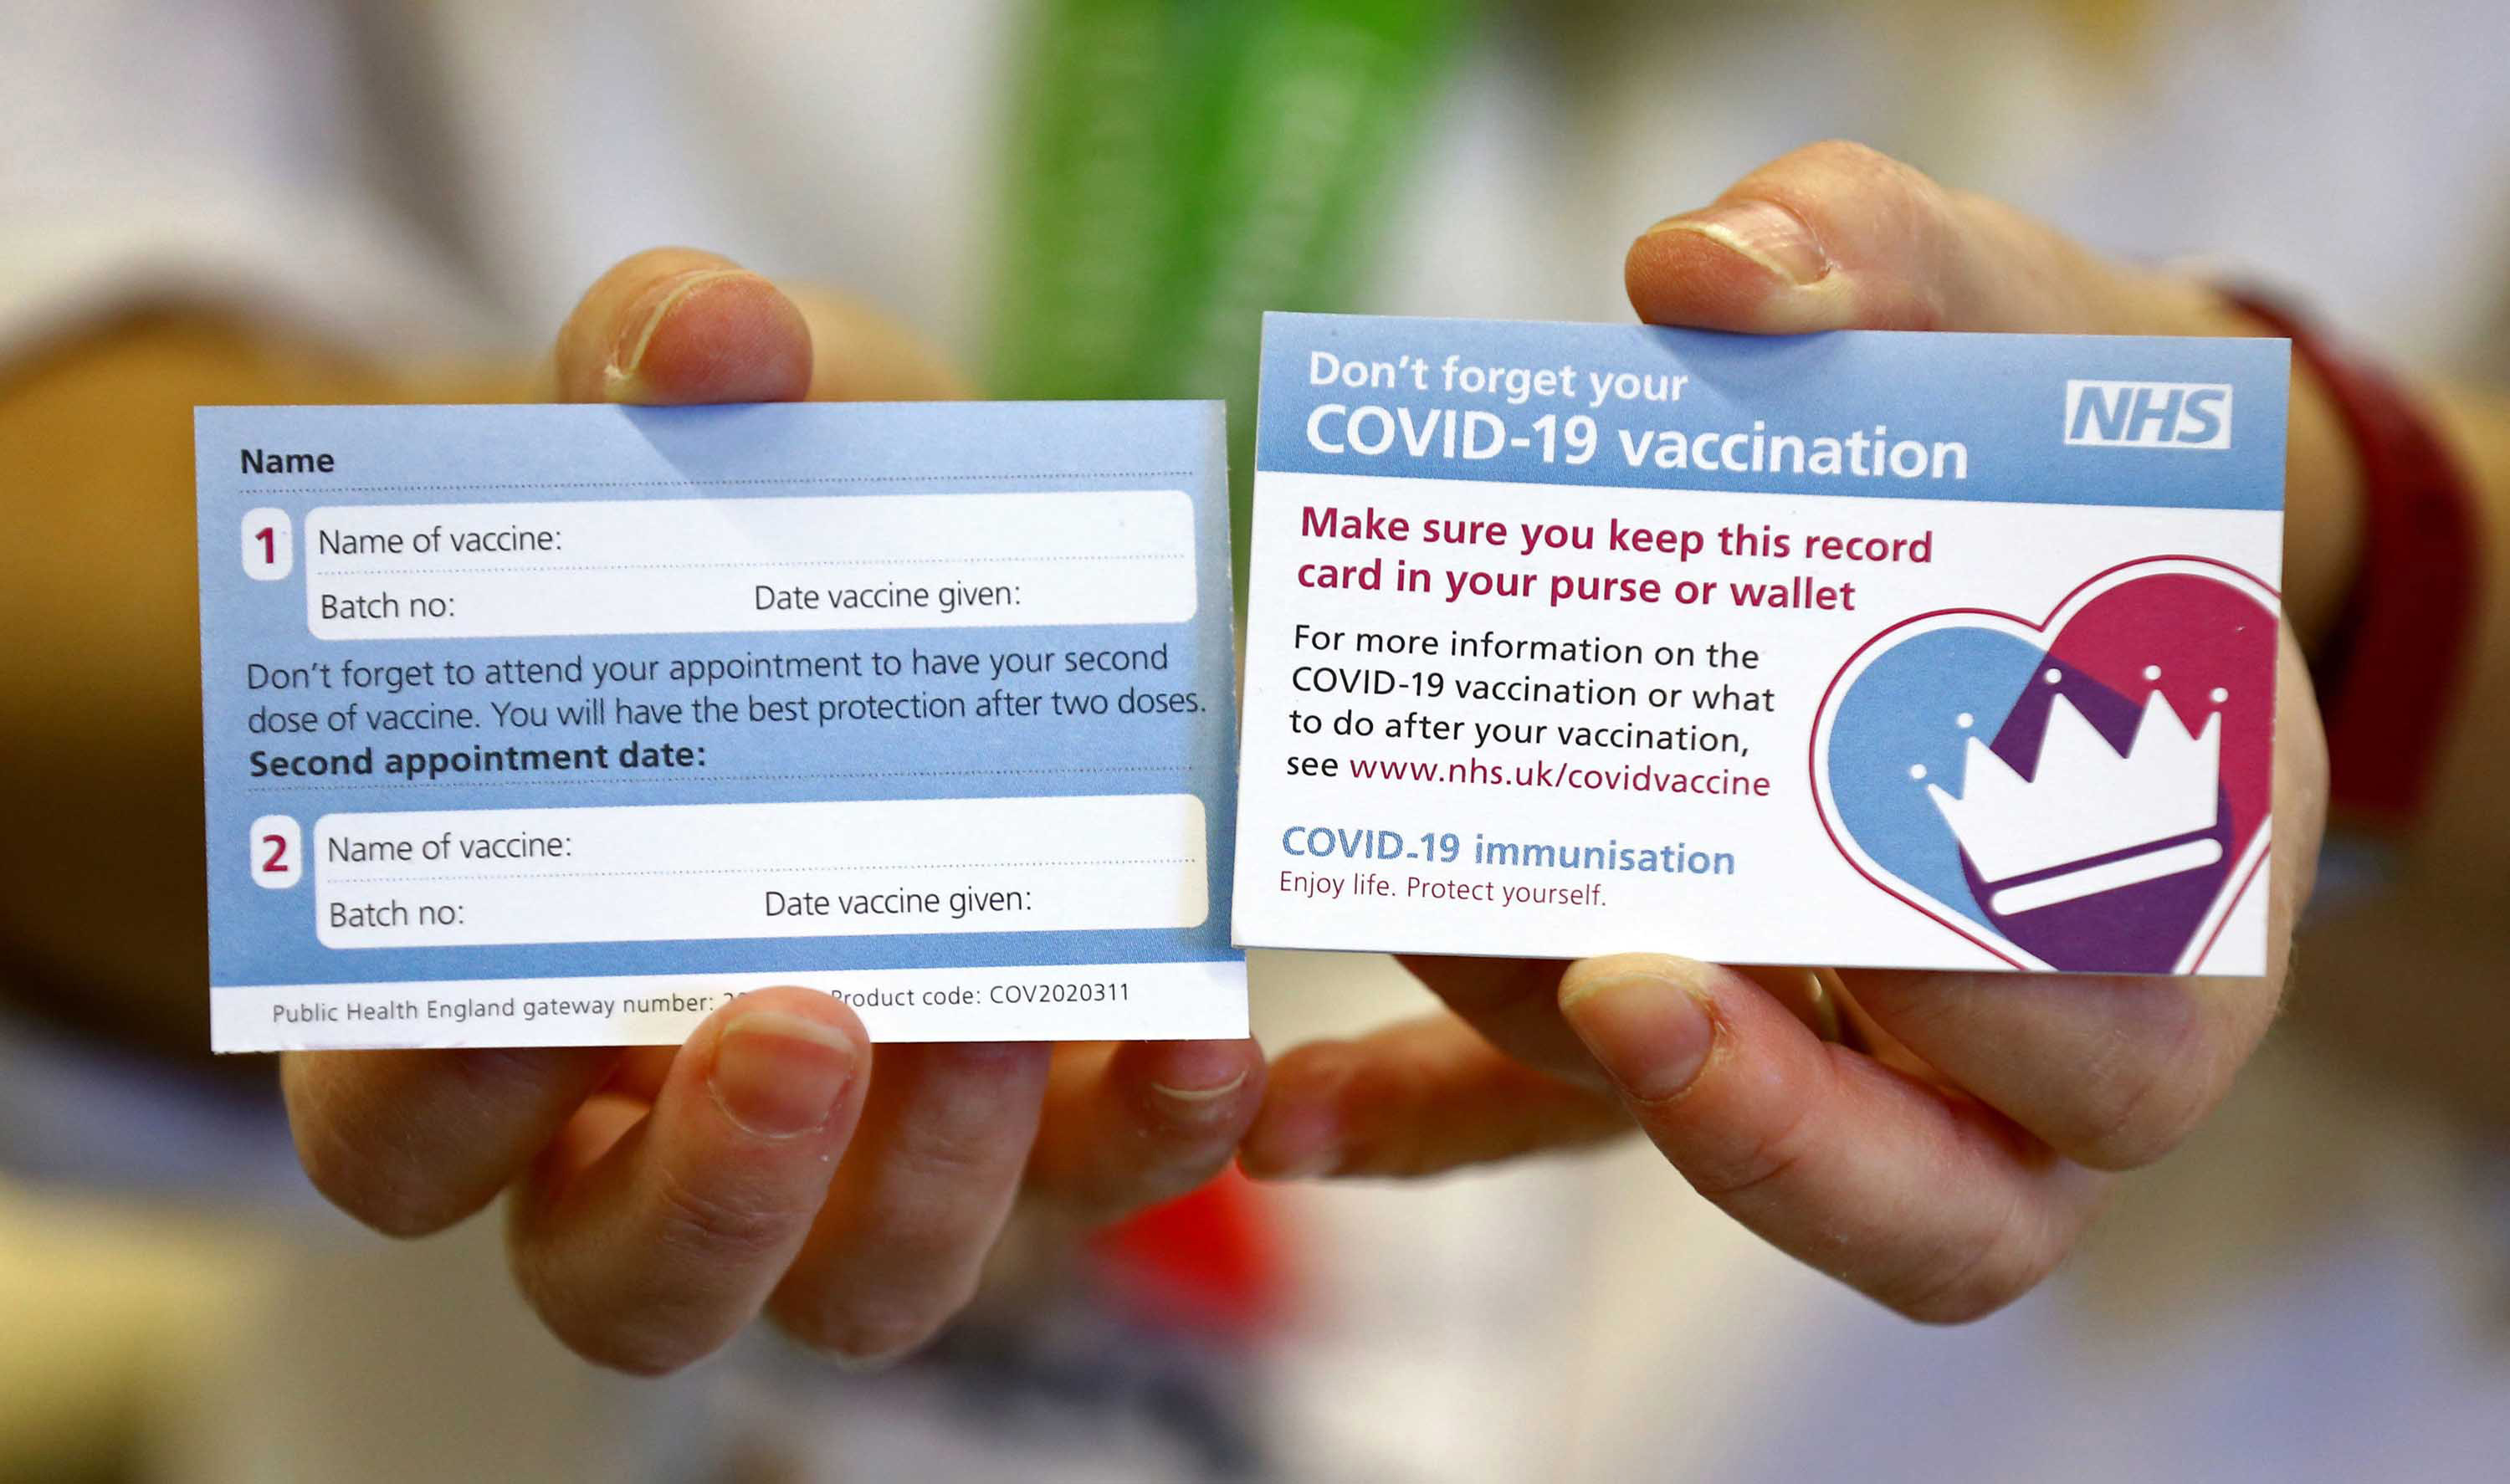 A model holds a card which will be given to patients following their vaccination for COVID-19 at Croydon University Hospital in south London on December 5, 2020, where the first batch of COVID-19 vaccinations has been delivered to the area.